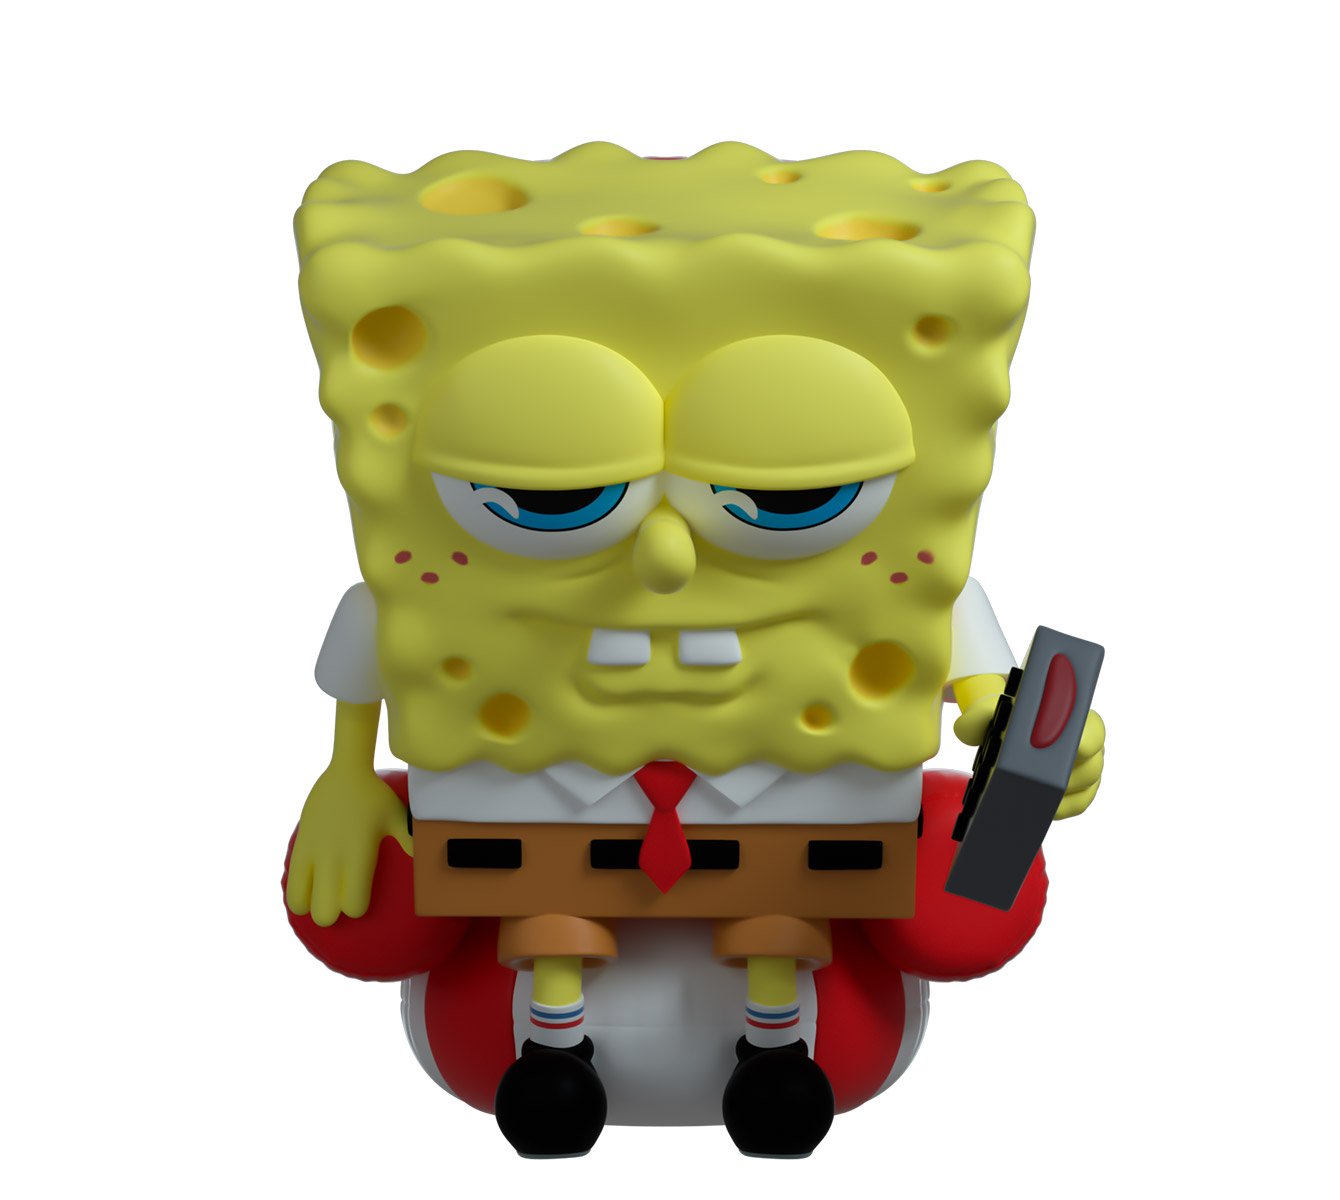 SpongeBob Squarepants: SpongeBob Heading Out Toy Figure by Youtooz Collectibles